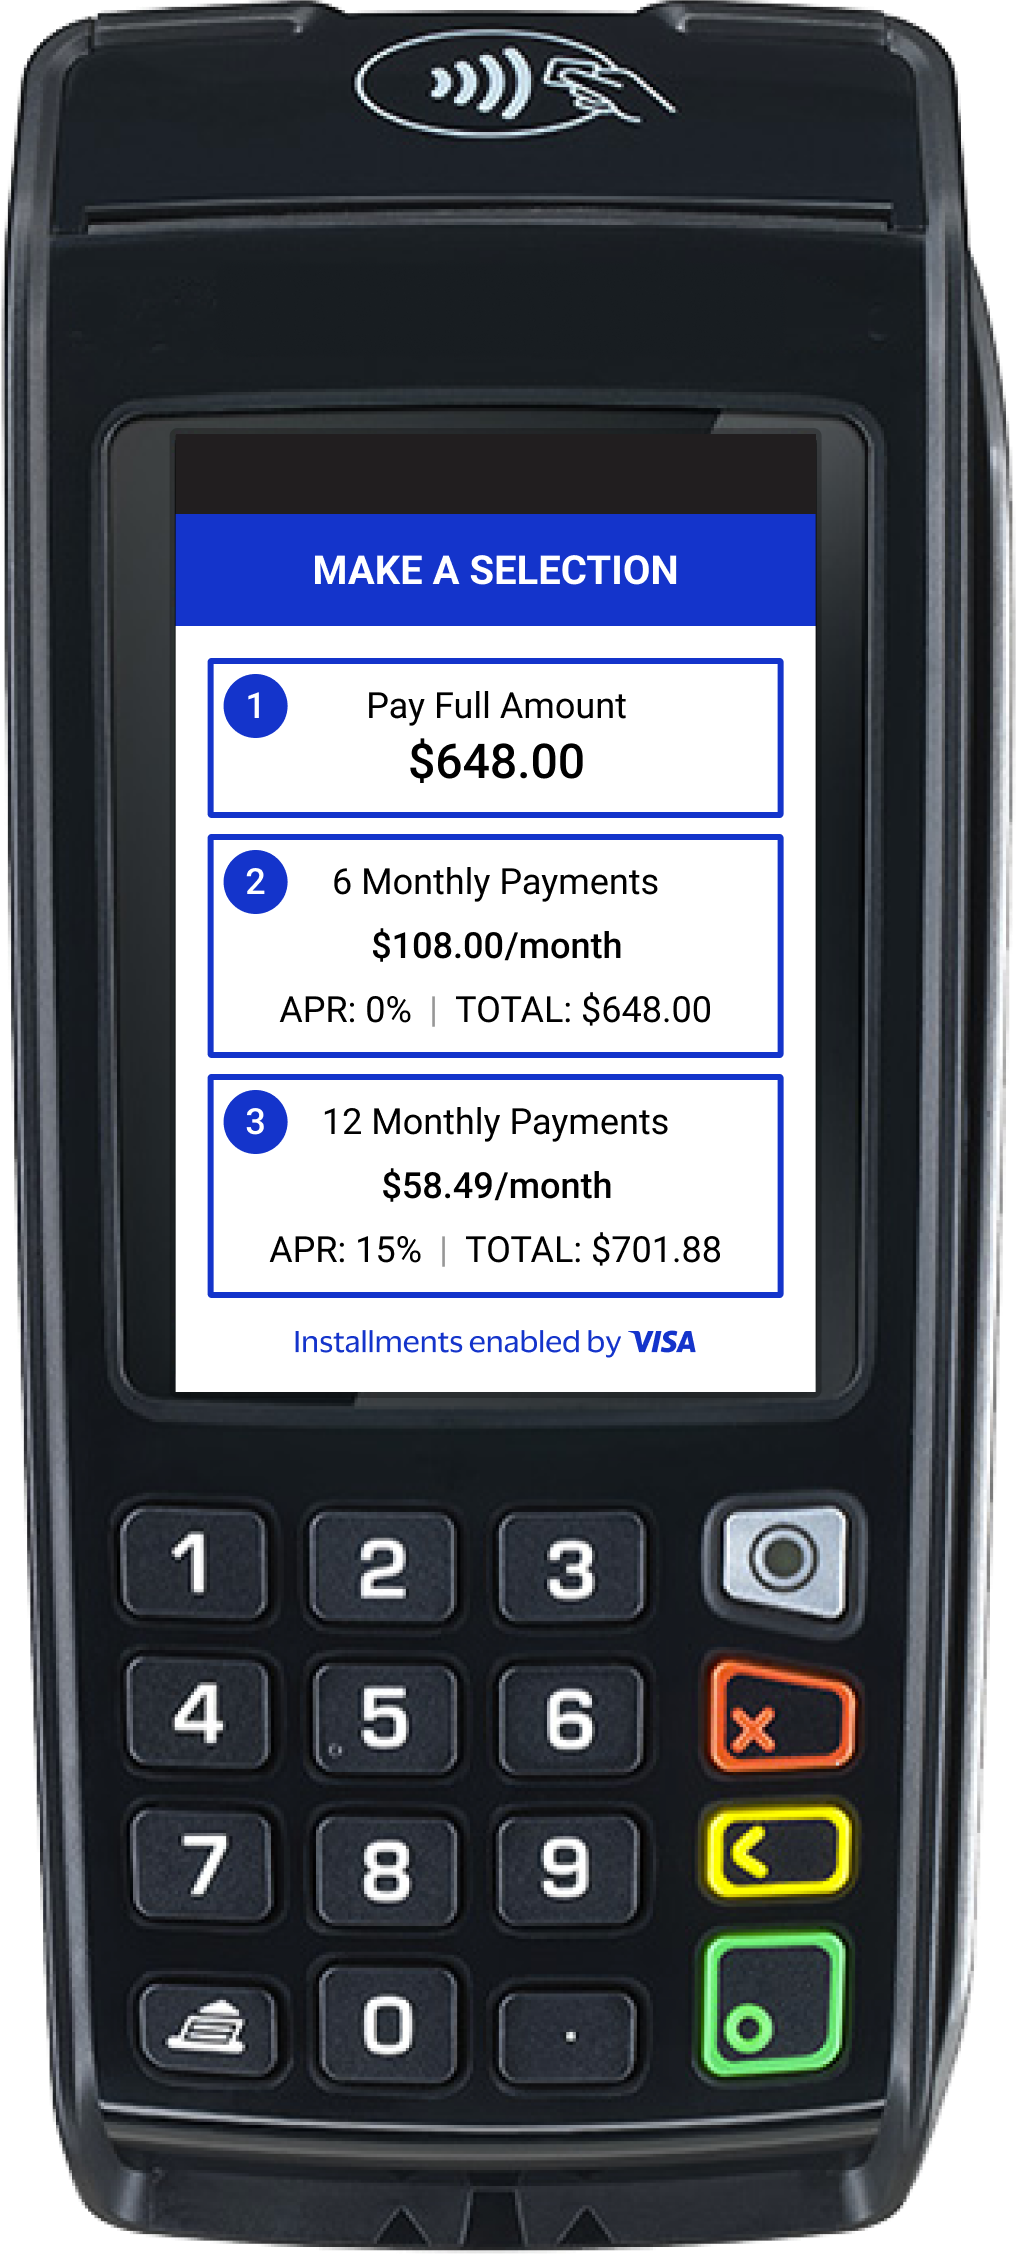 Canada portrait 2 style payment terminal, select a plan